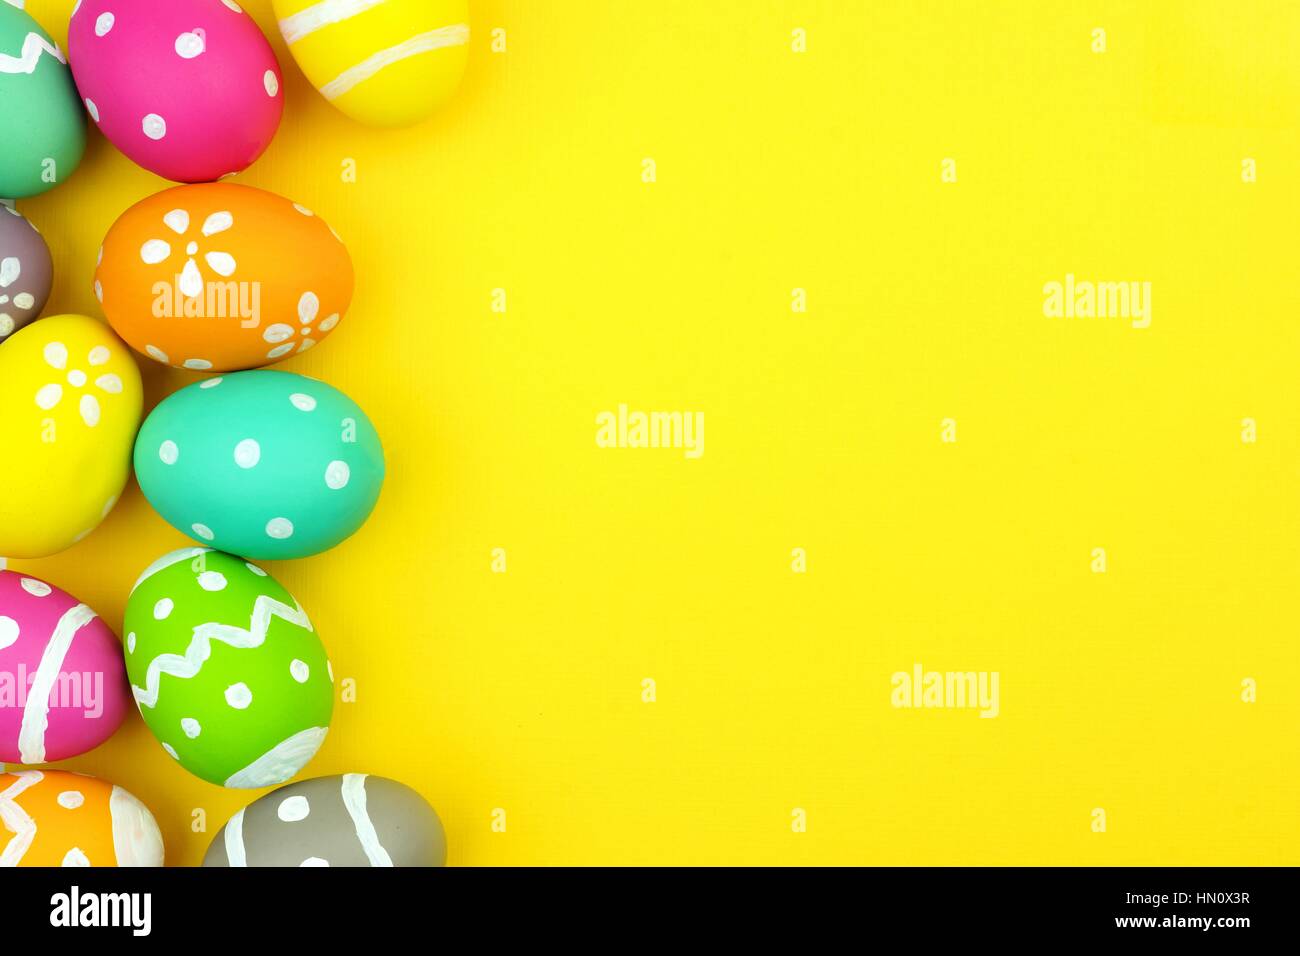 Colorful Easter egg side border over a yellow paper background Stock Photo